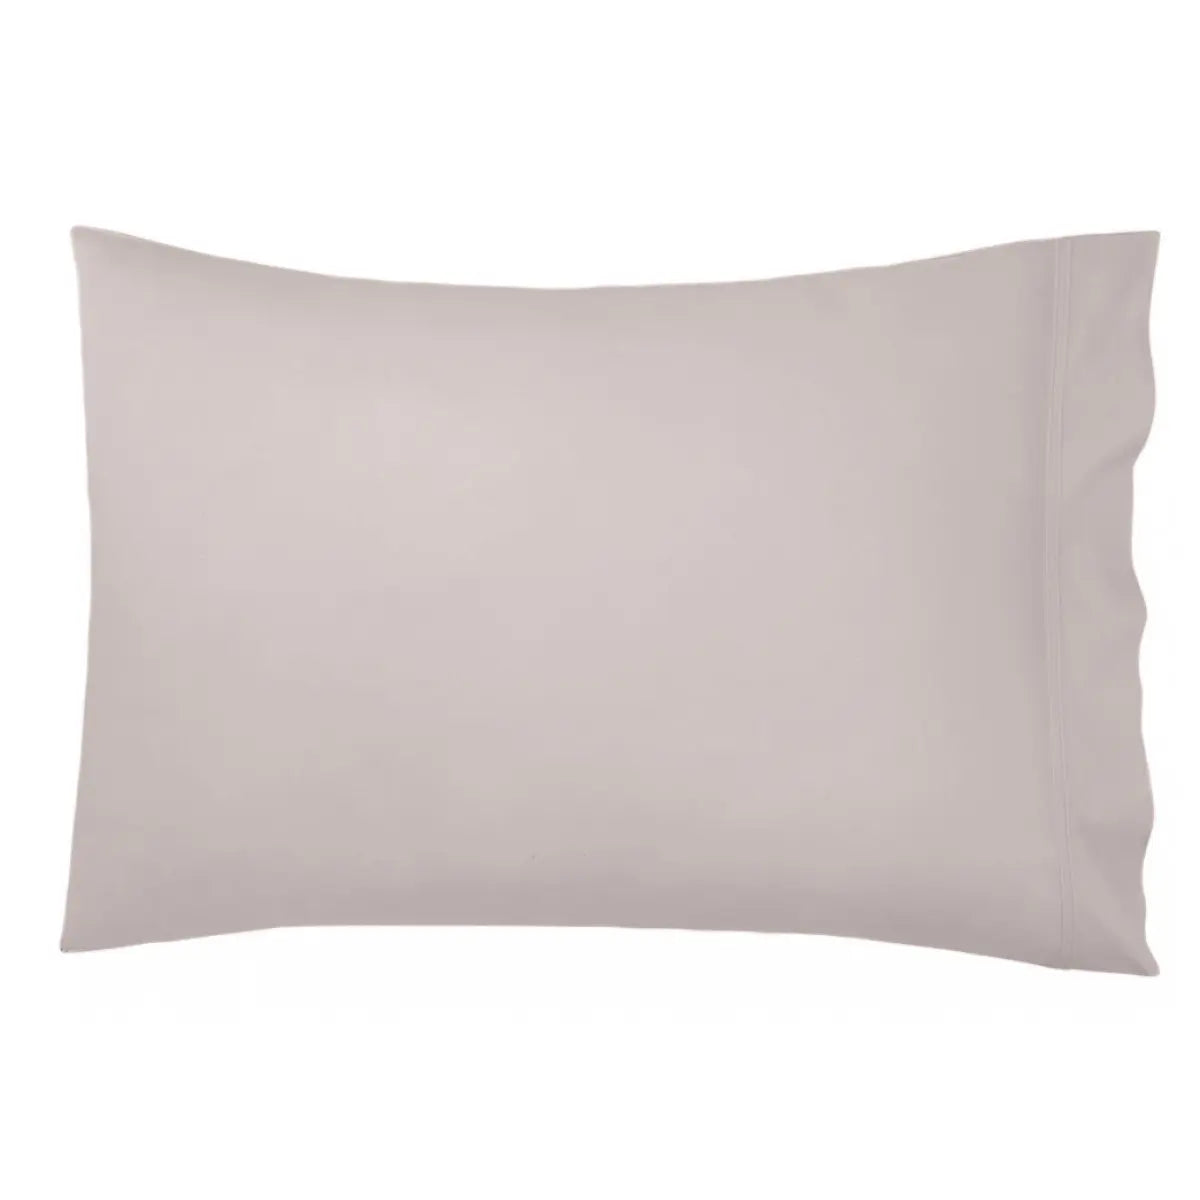 Yves Delorme Triomphe Pillowcase in Pierre